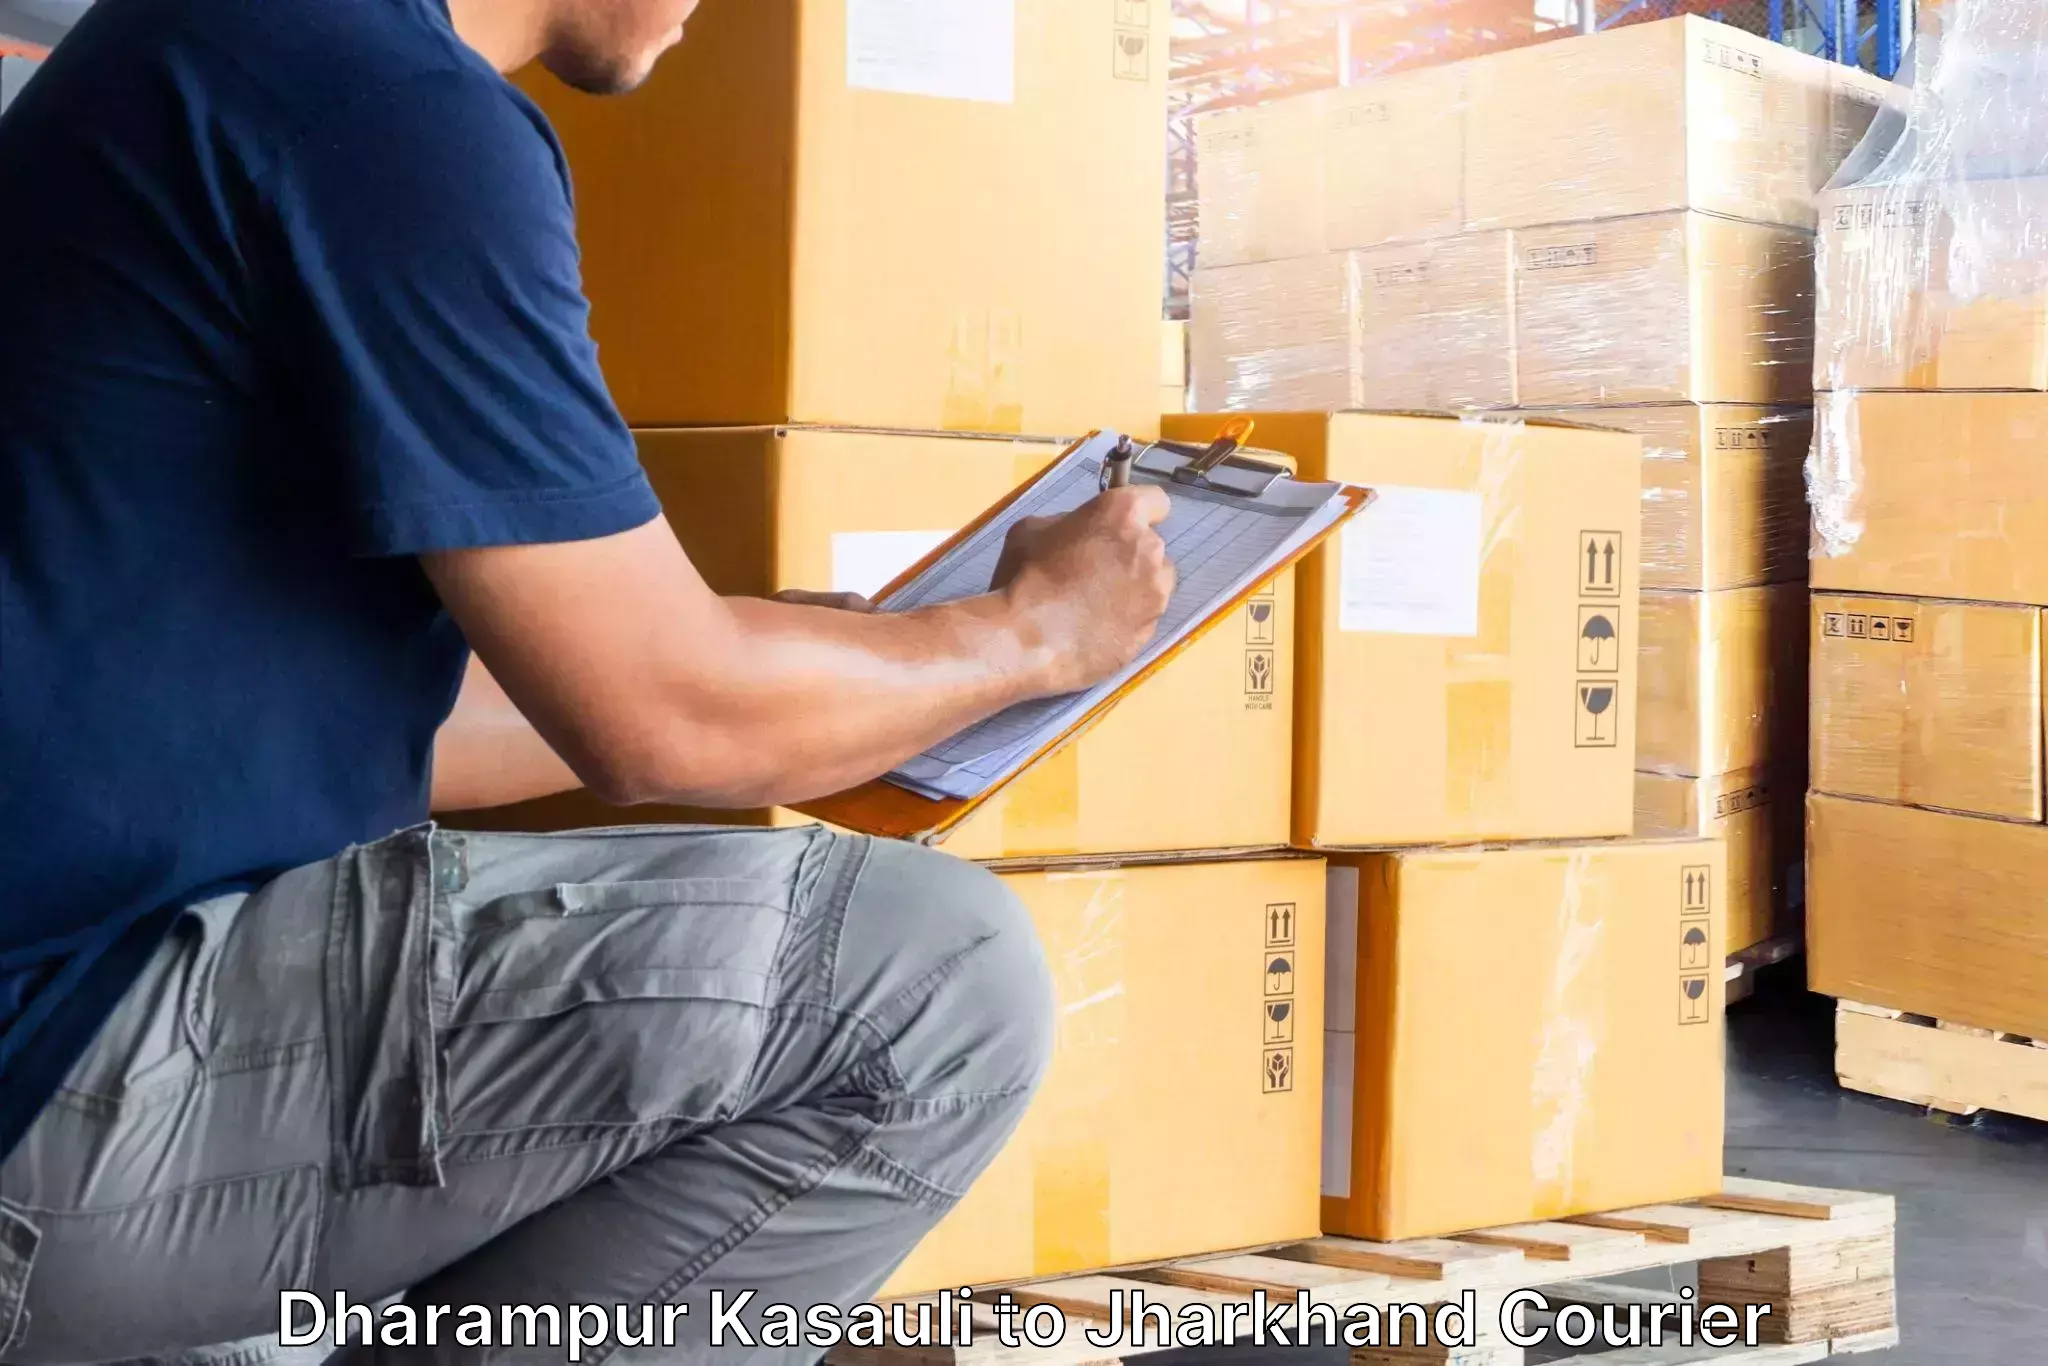 Moving and storage services in Dharampur Kasauli to Topchanchi